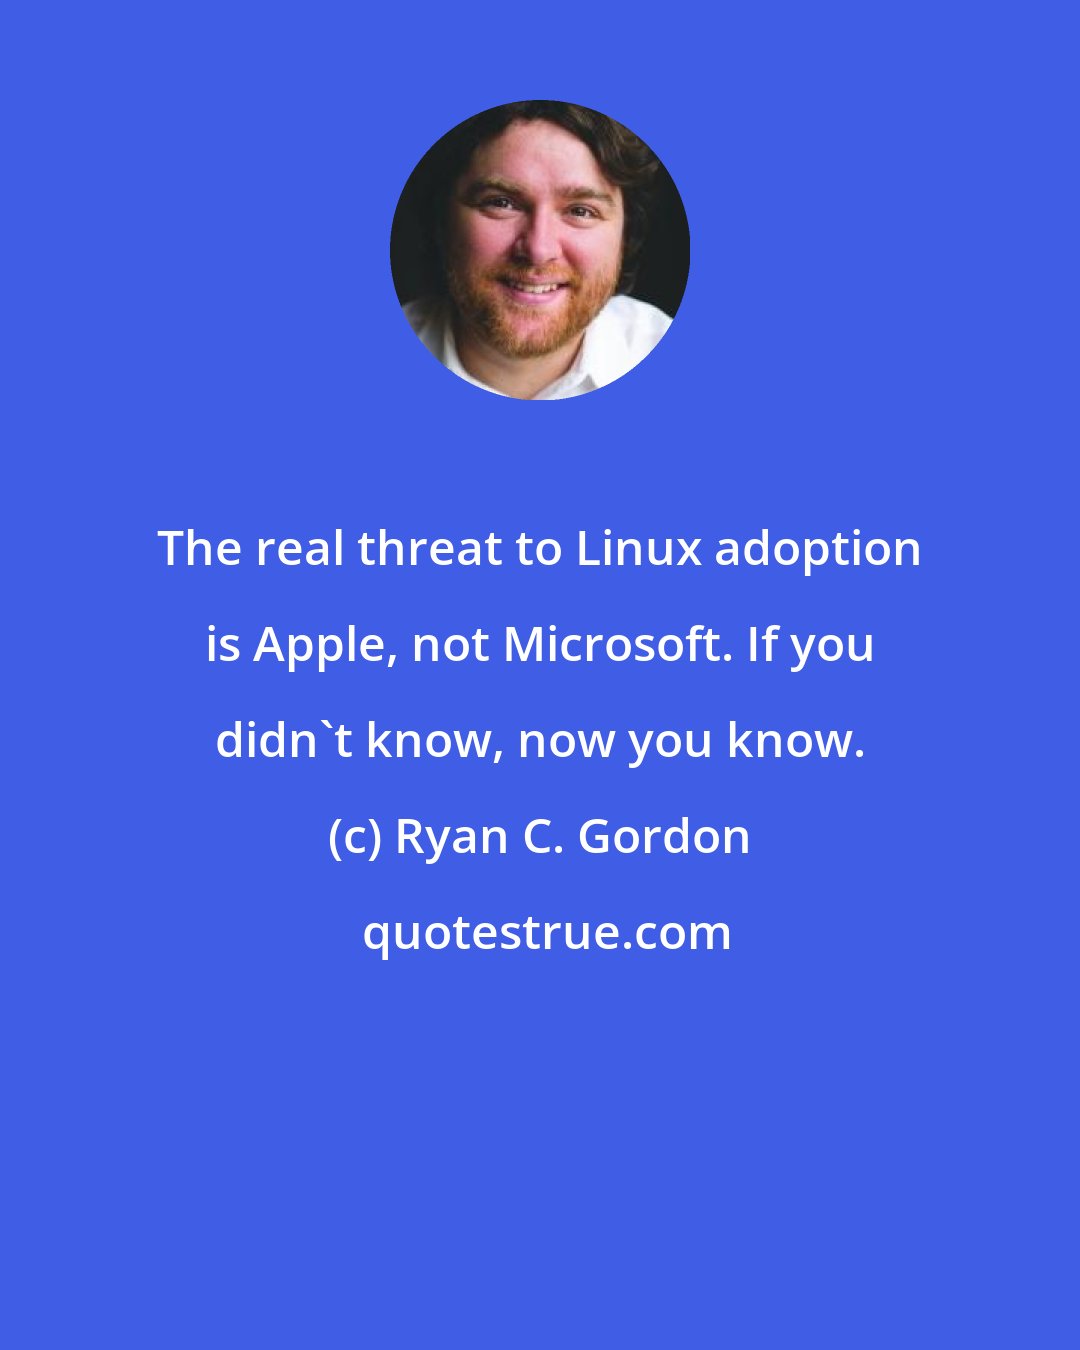 Ryan C. Gordon: The real threat to Linux adoption is Apple, not Microsoft. If you didn't know, now you know.